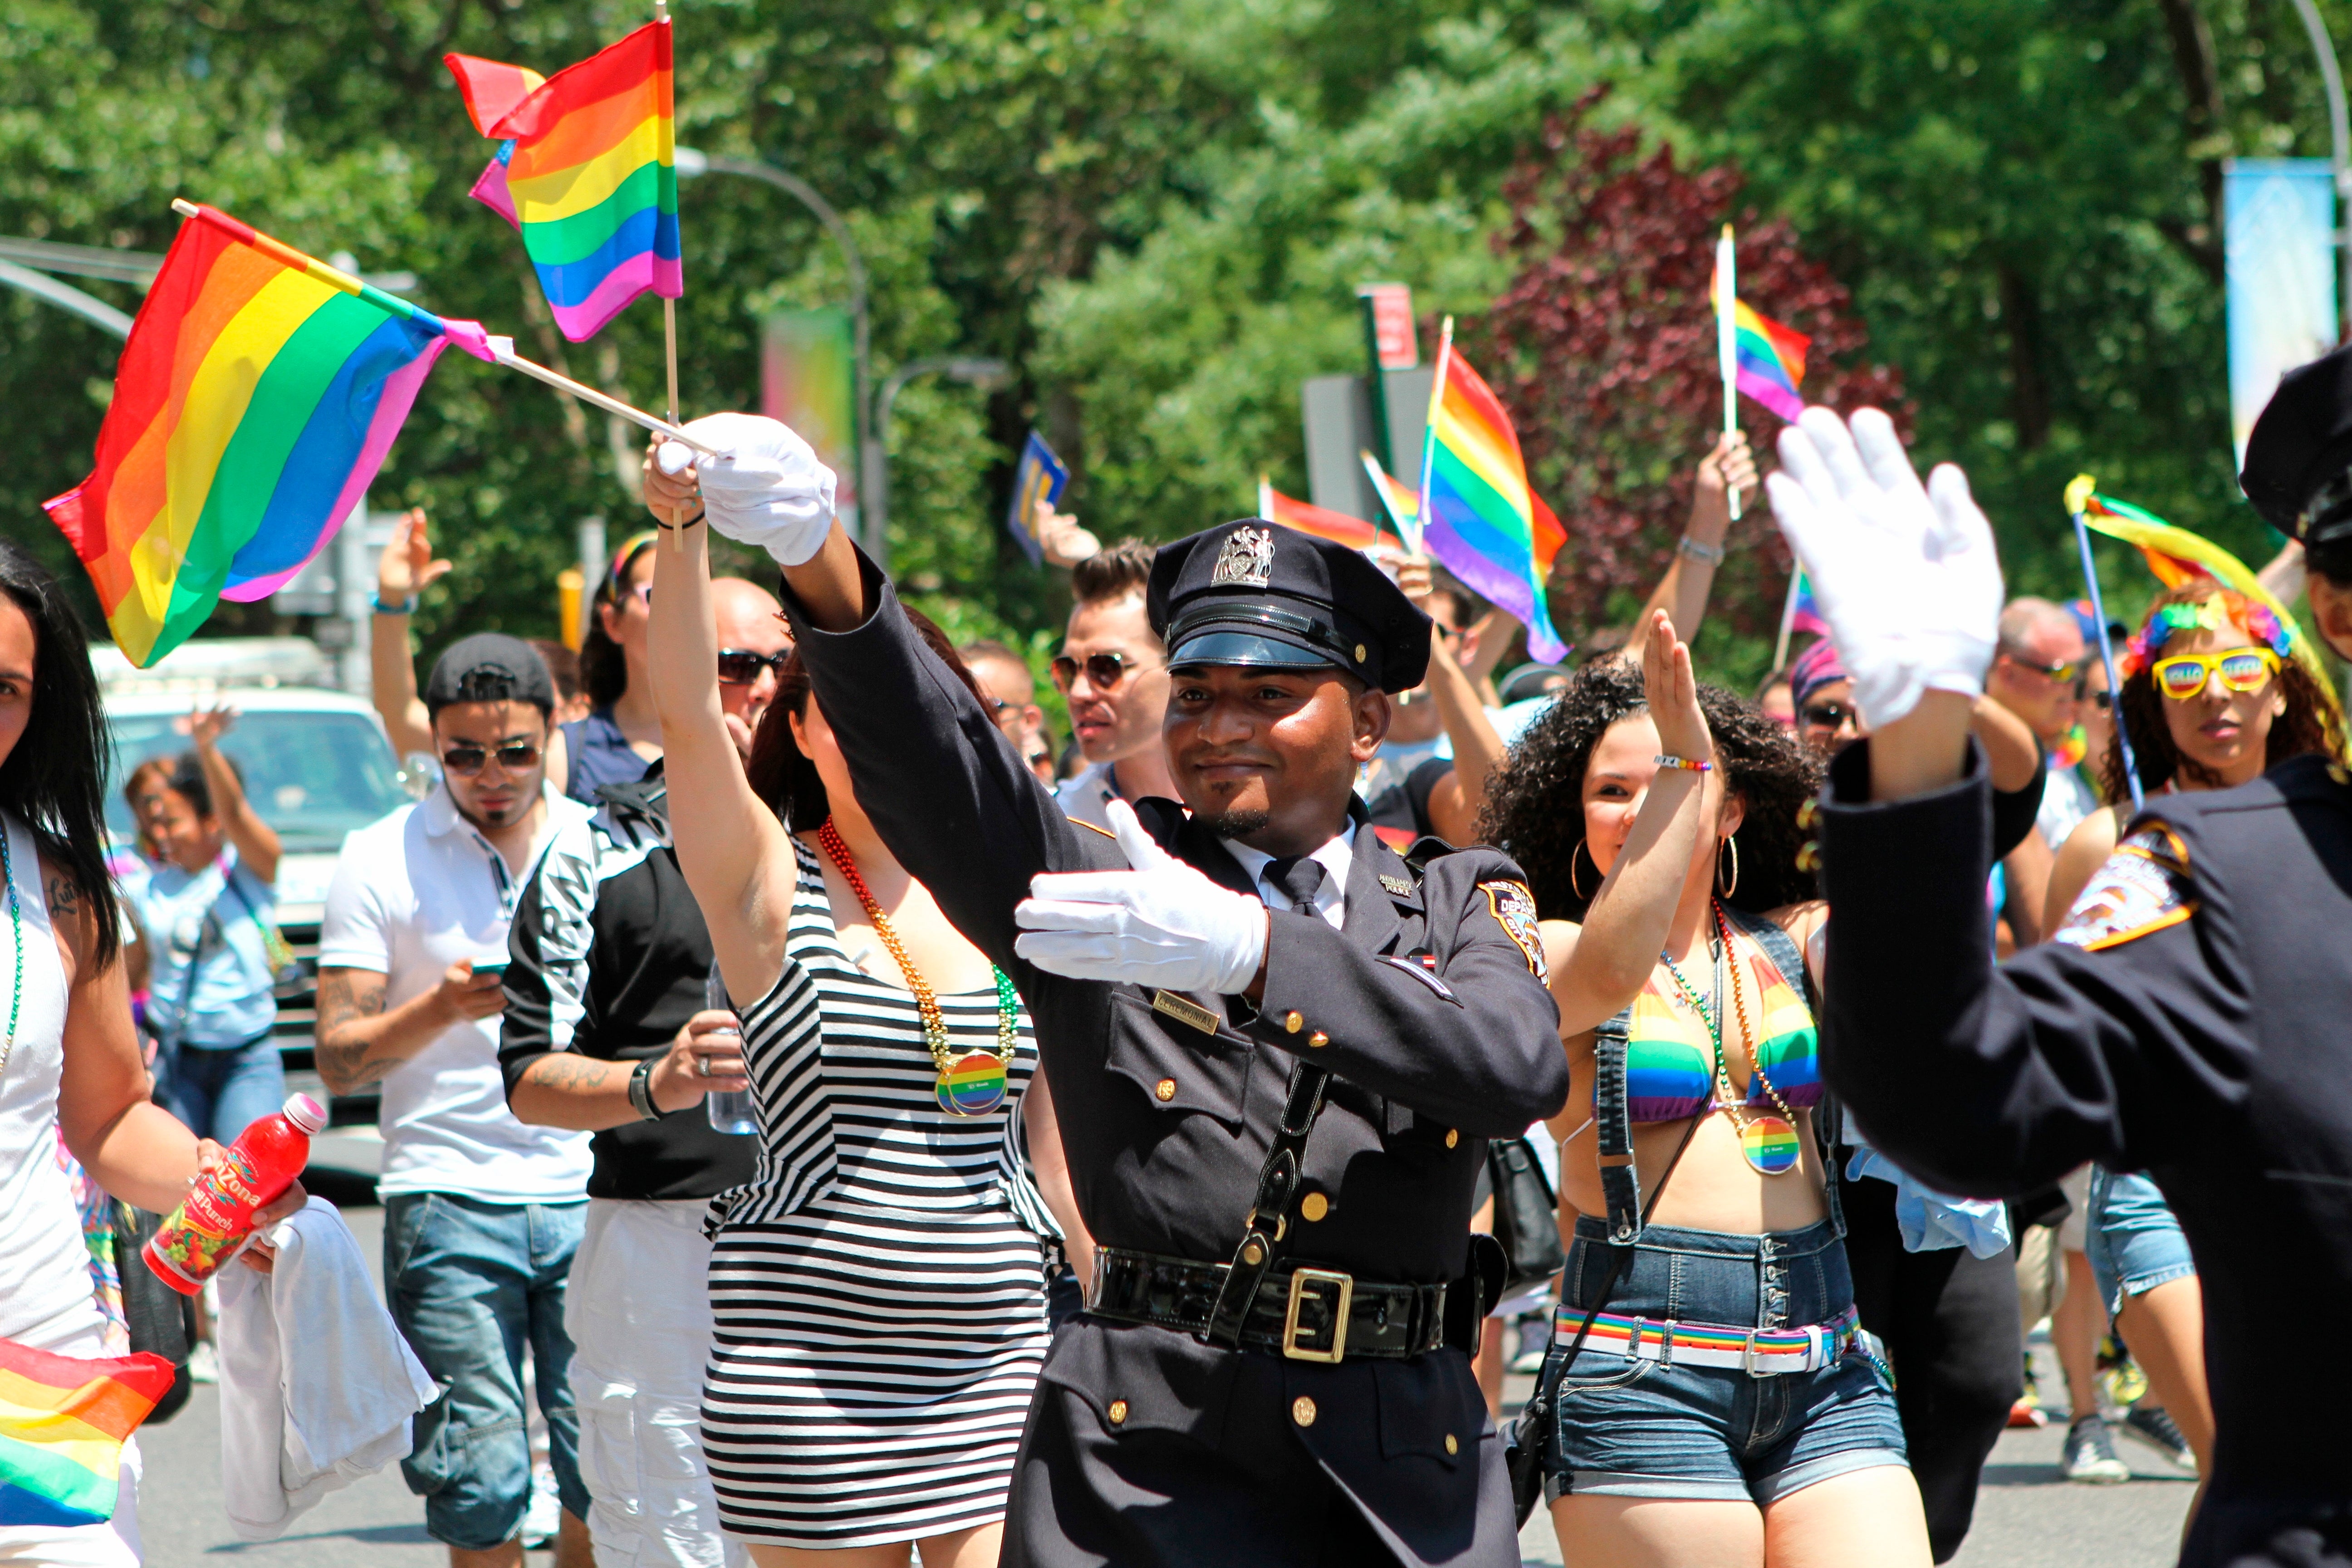 when is the gay pride parade in new york city